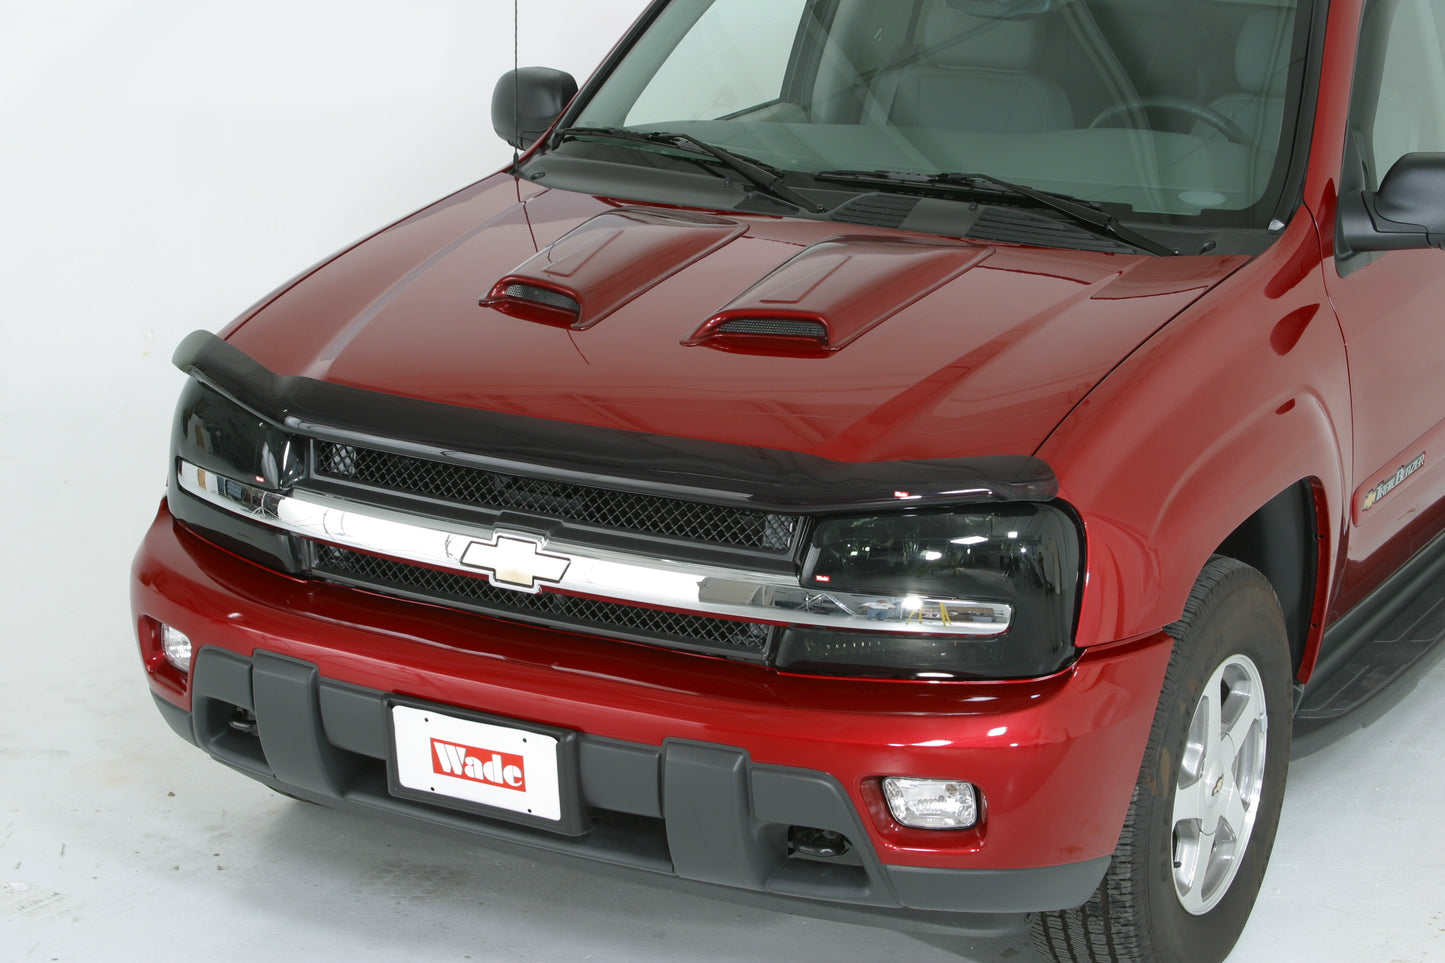 1994 Nissan Pickup 4WD (recessed light) Head Light Covers